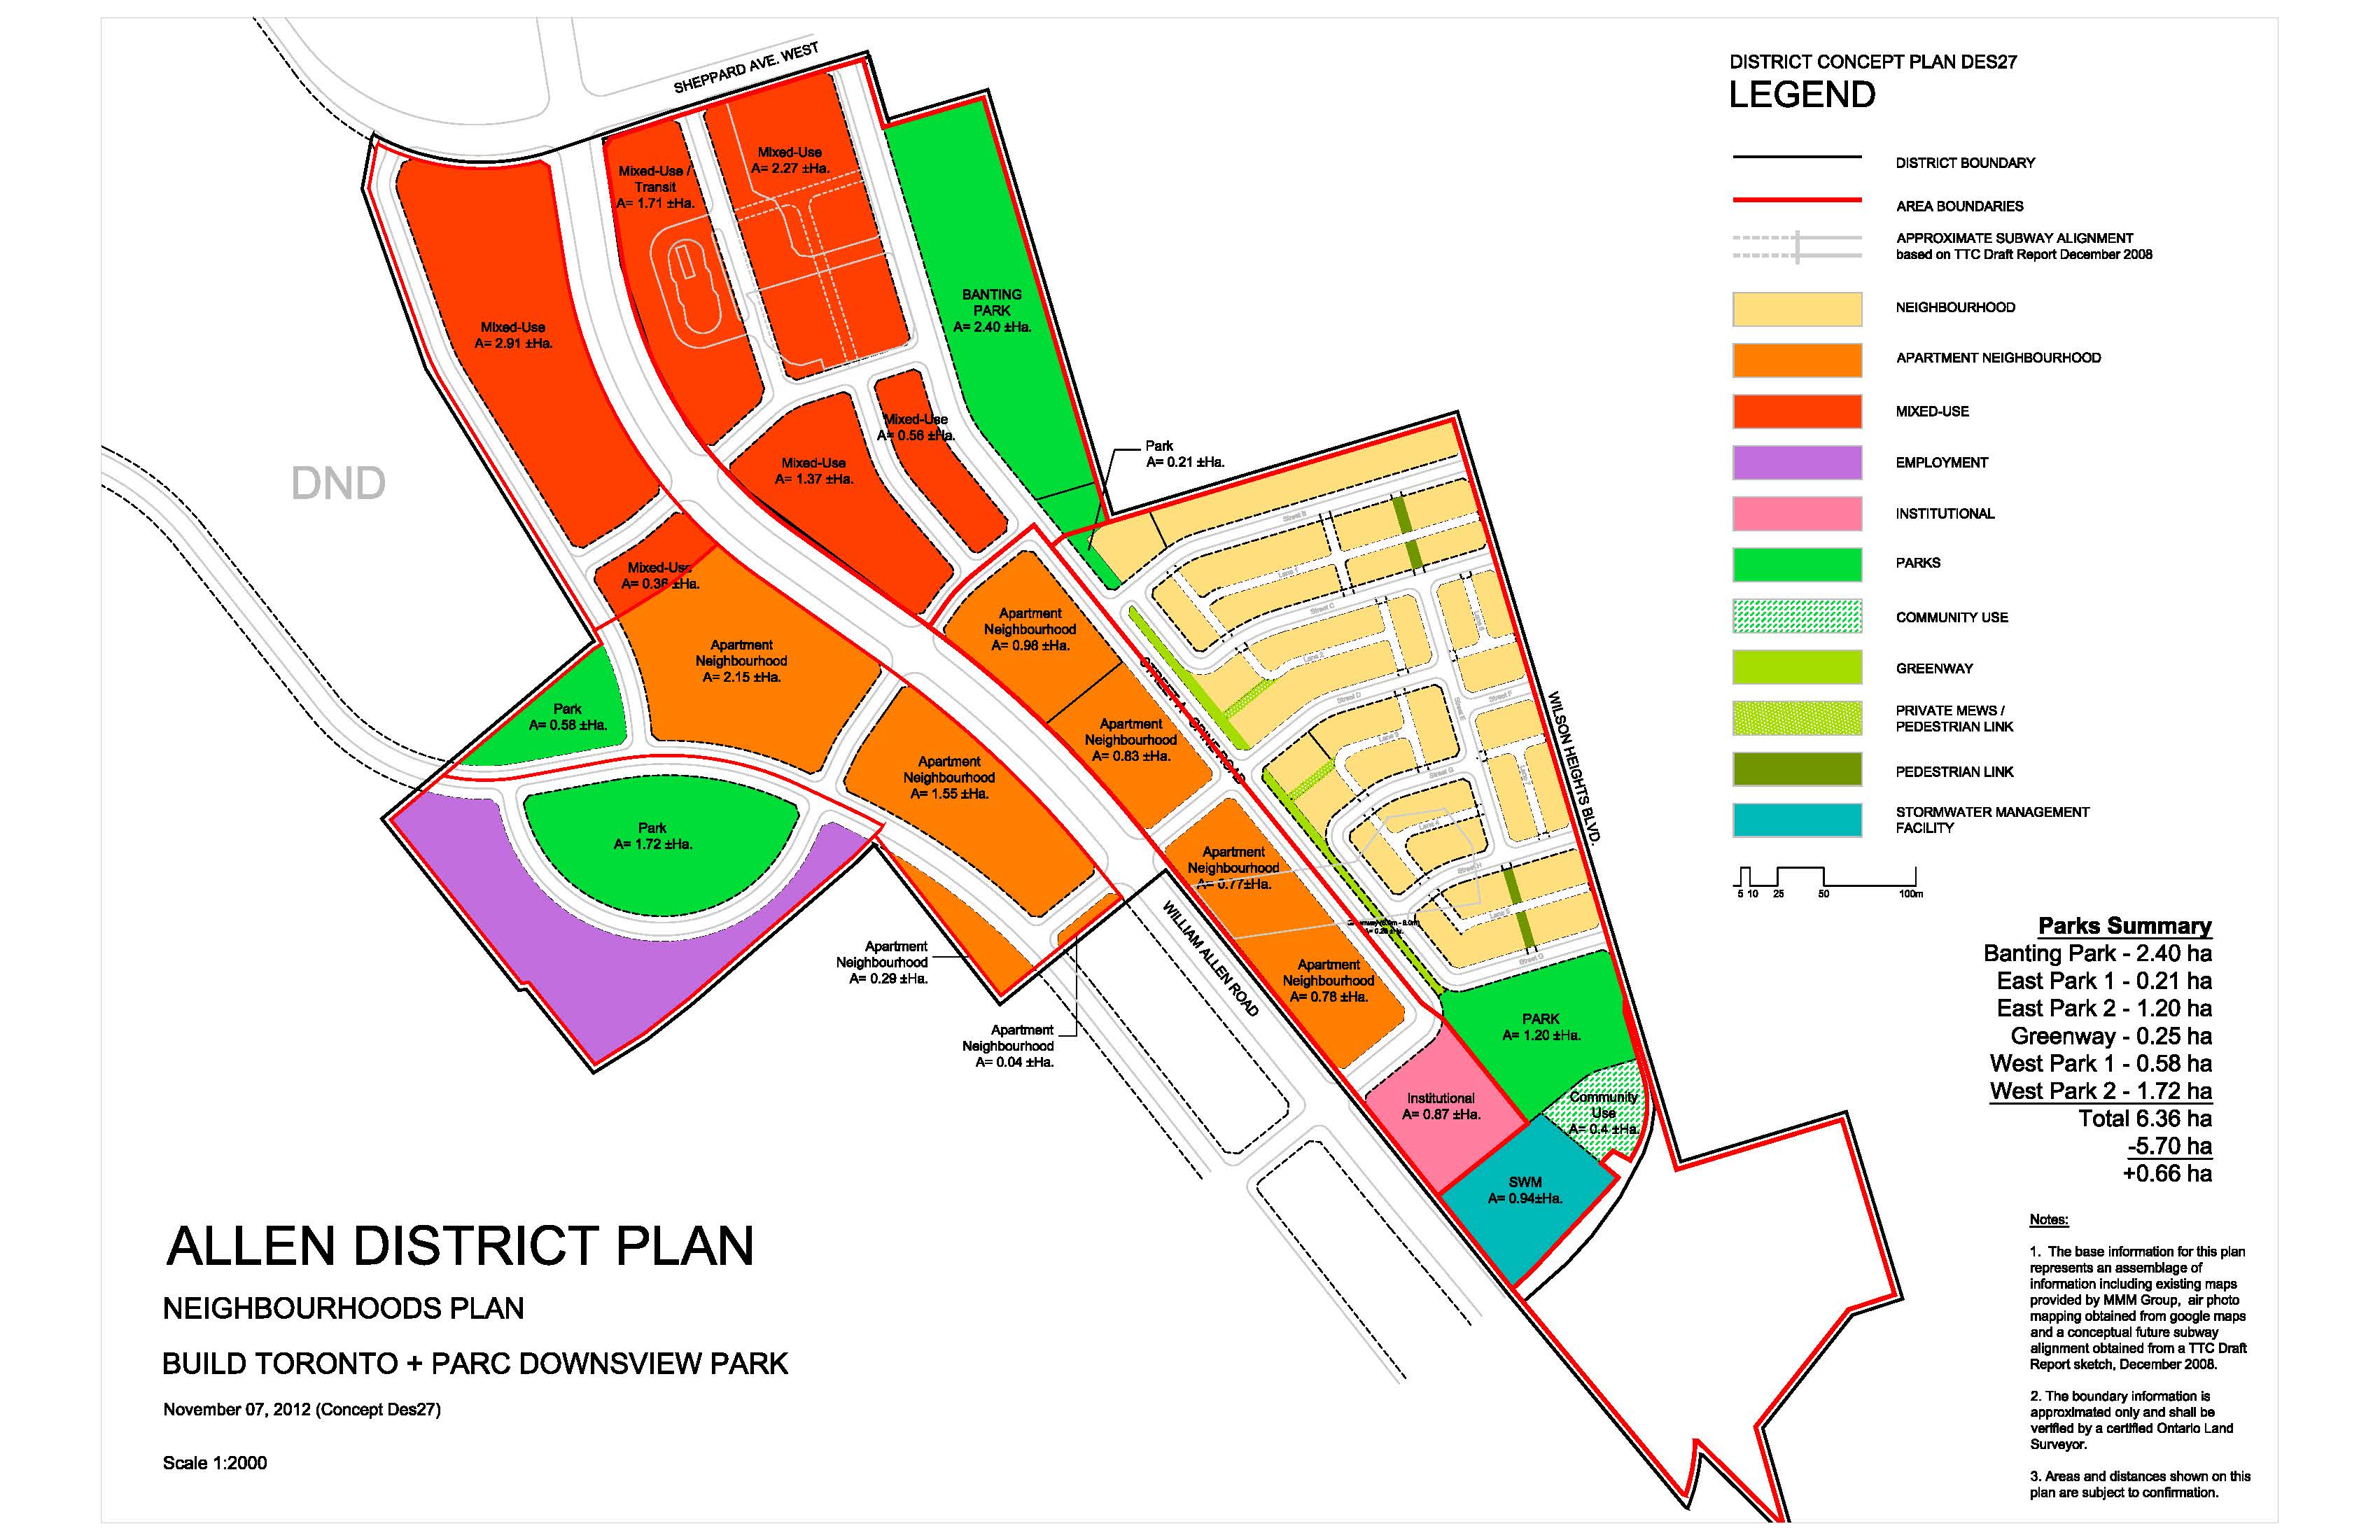 How To Plan Urban Planning Site Plan - vrogue.co